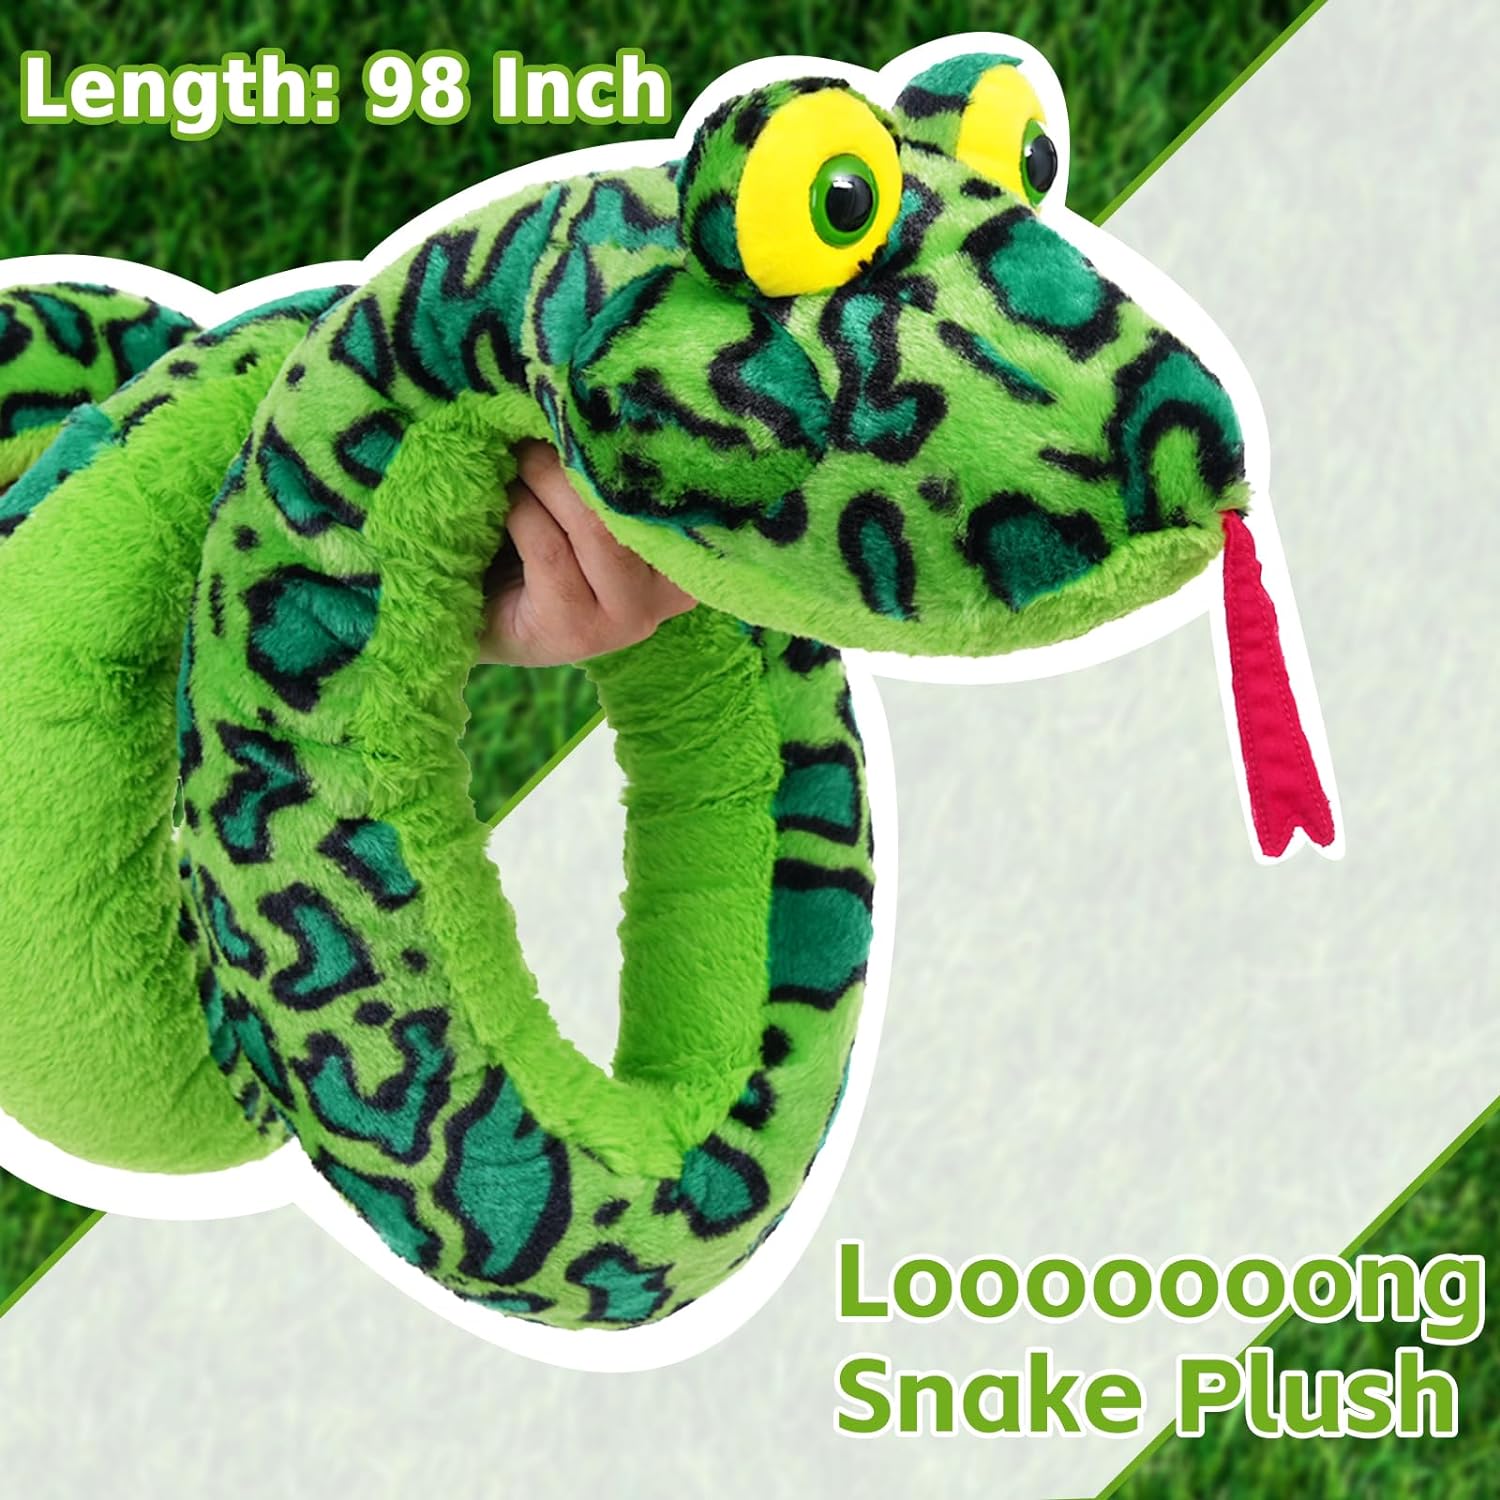 Giant Python Long Snake Plush Toy, Green, 98 Inches